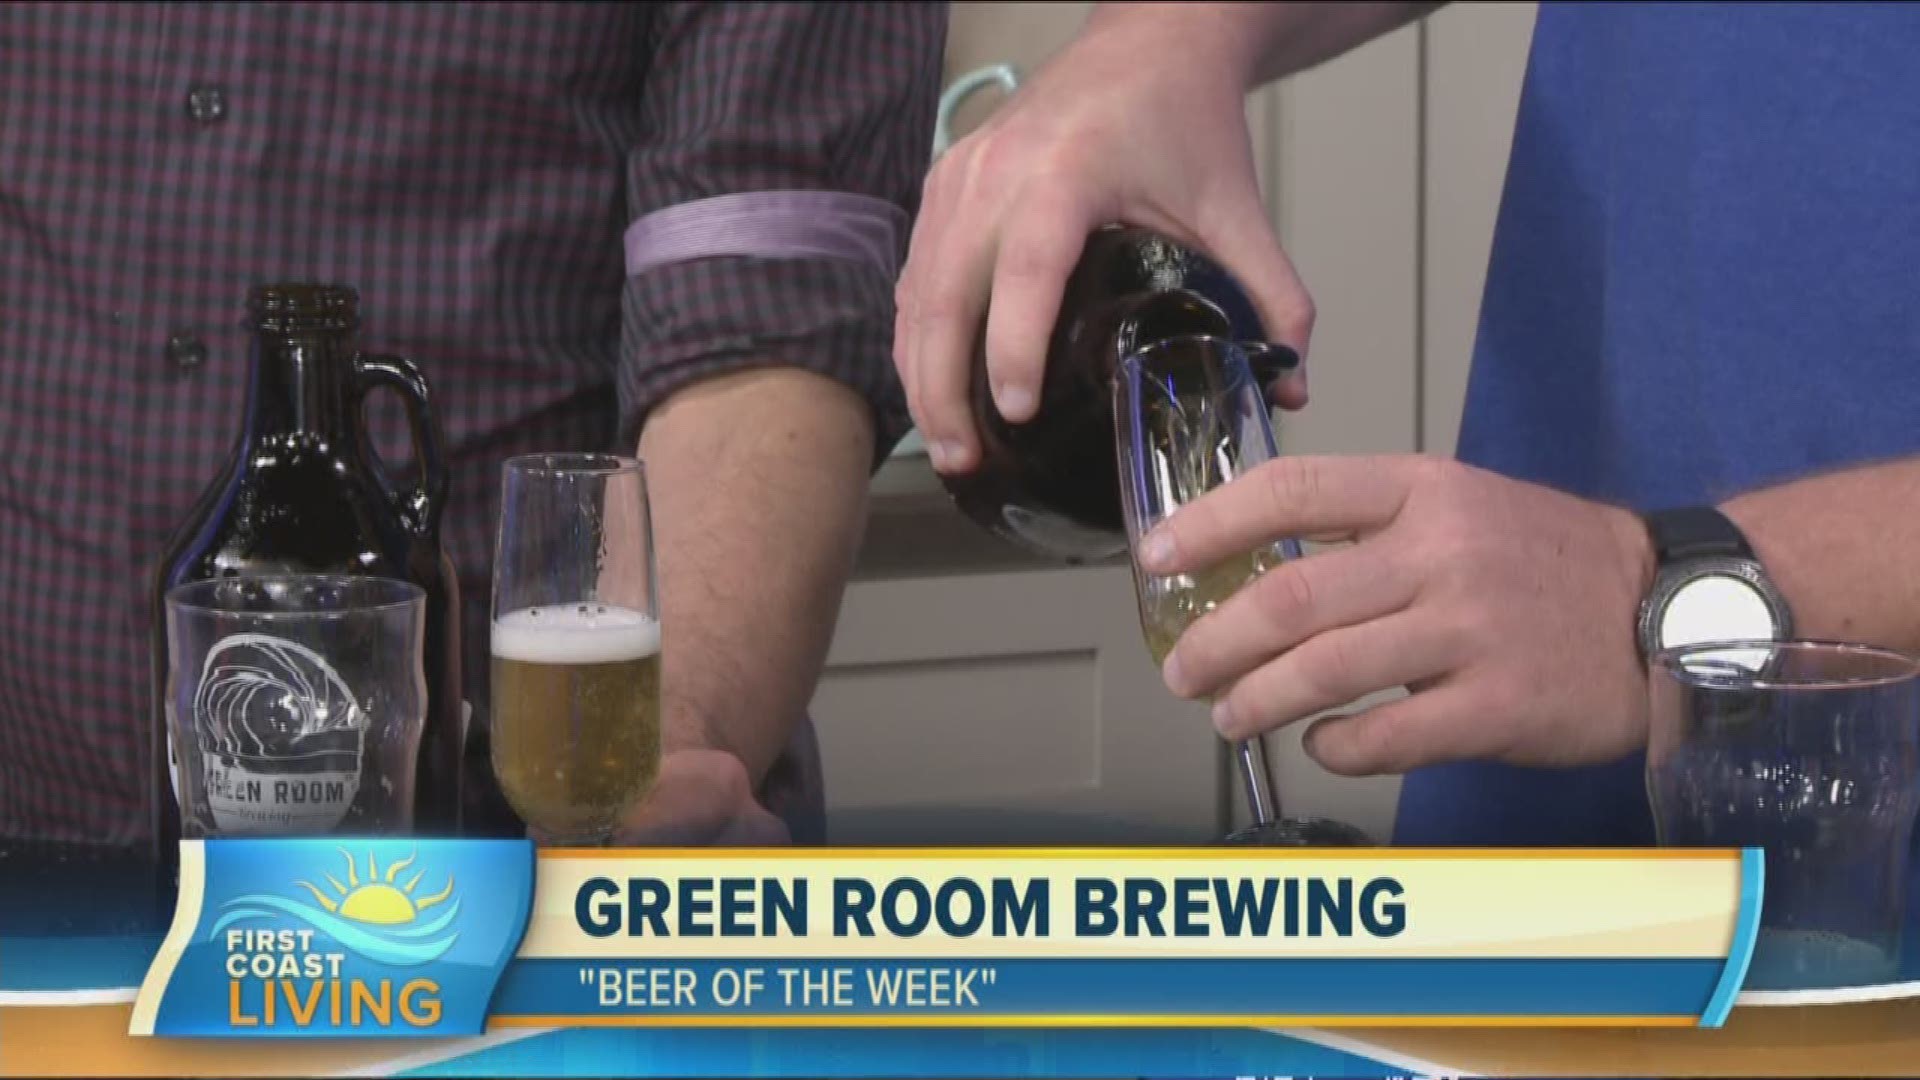 This week's Beer of the Week includes a chocolate stout and lucky charms blonde ale from Green Room Brewing.